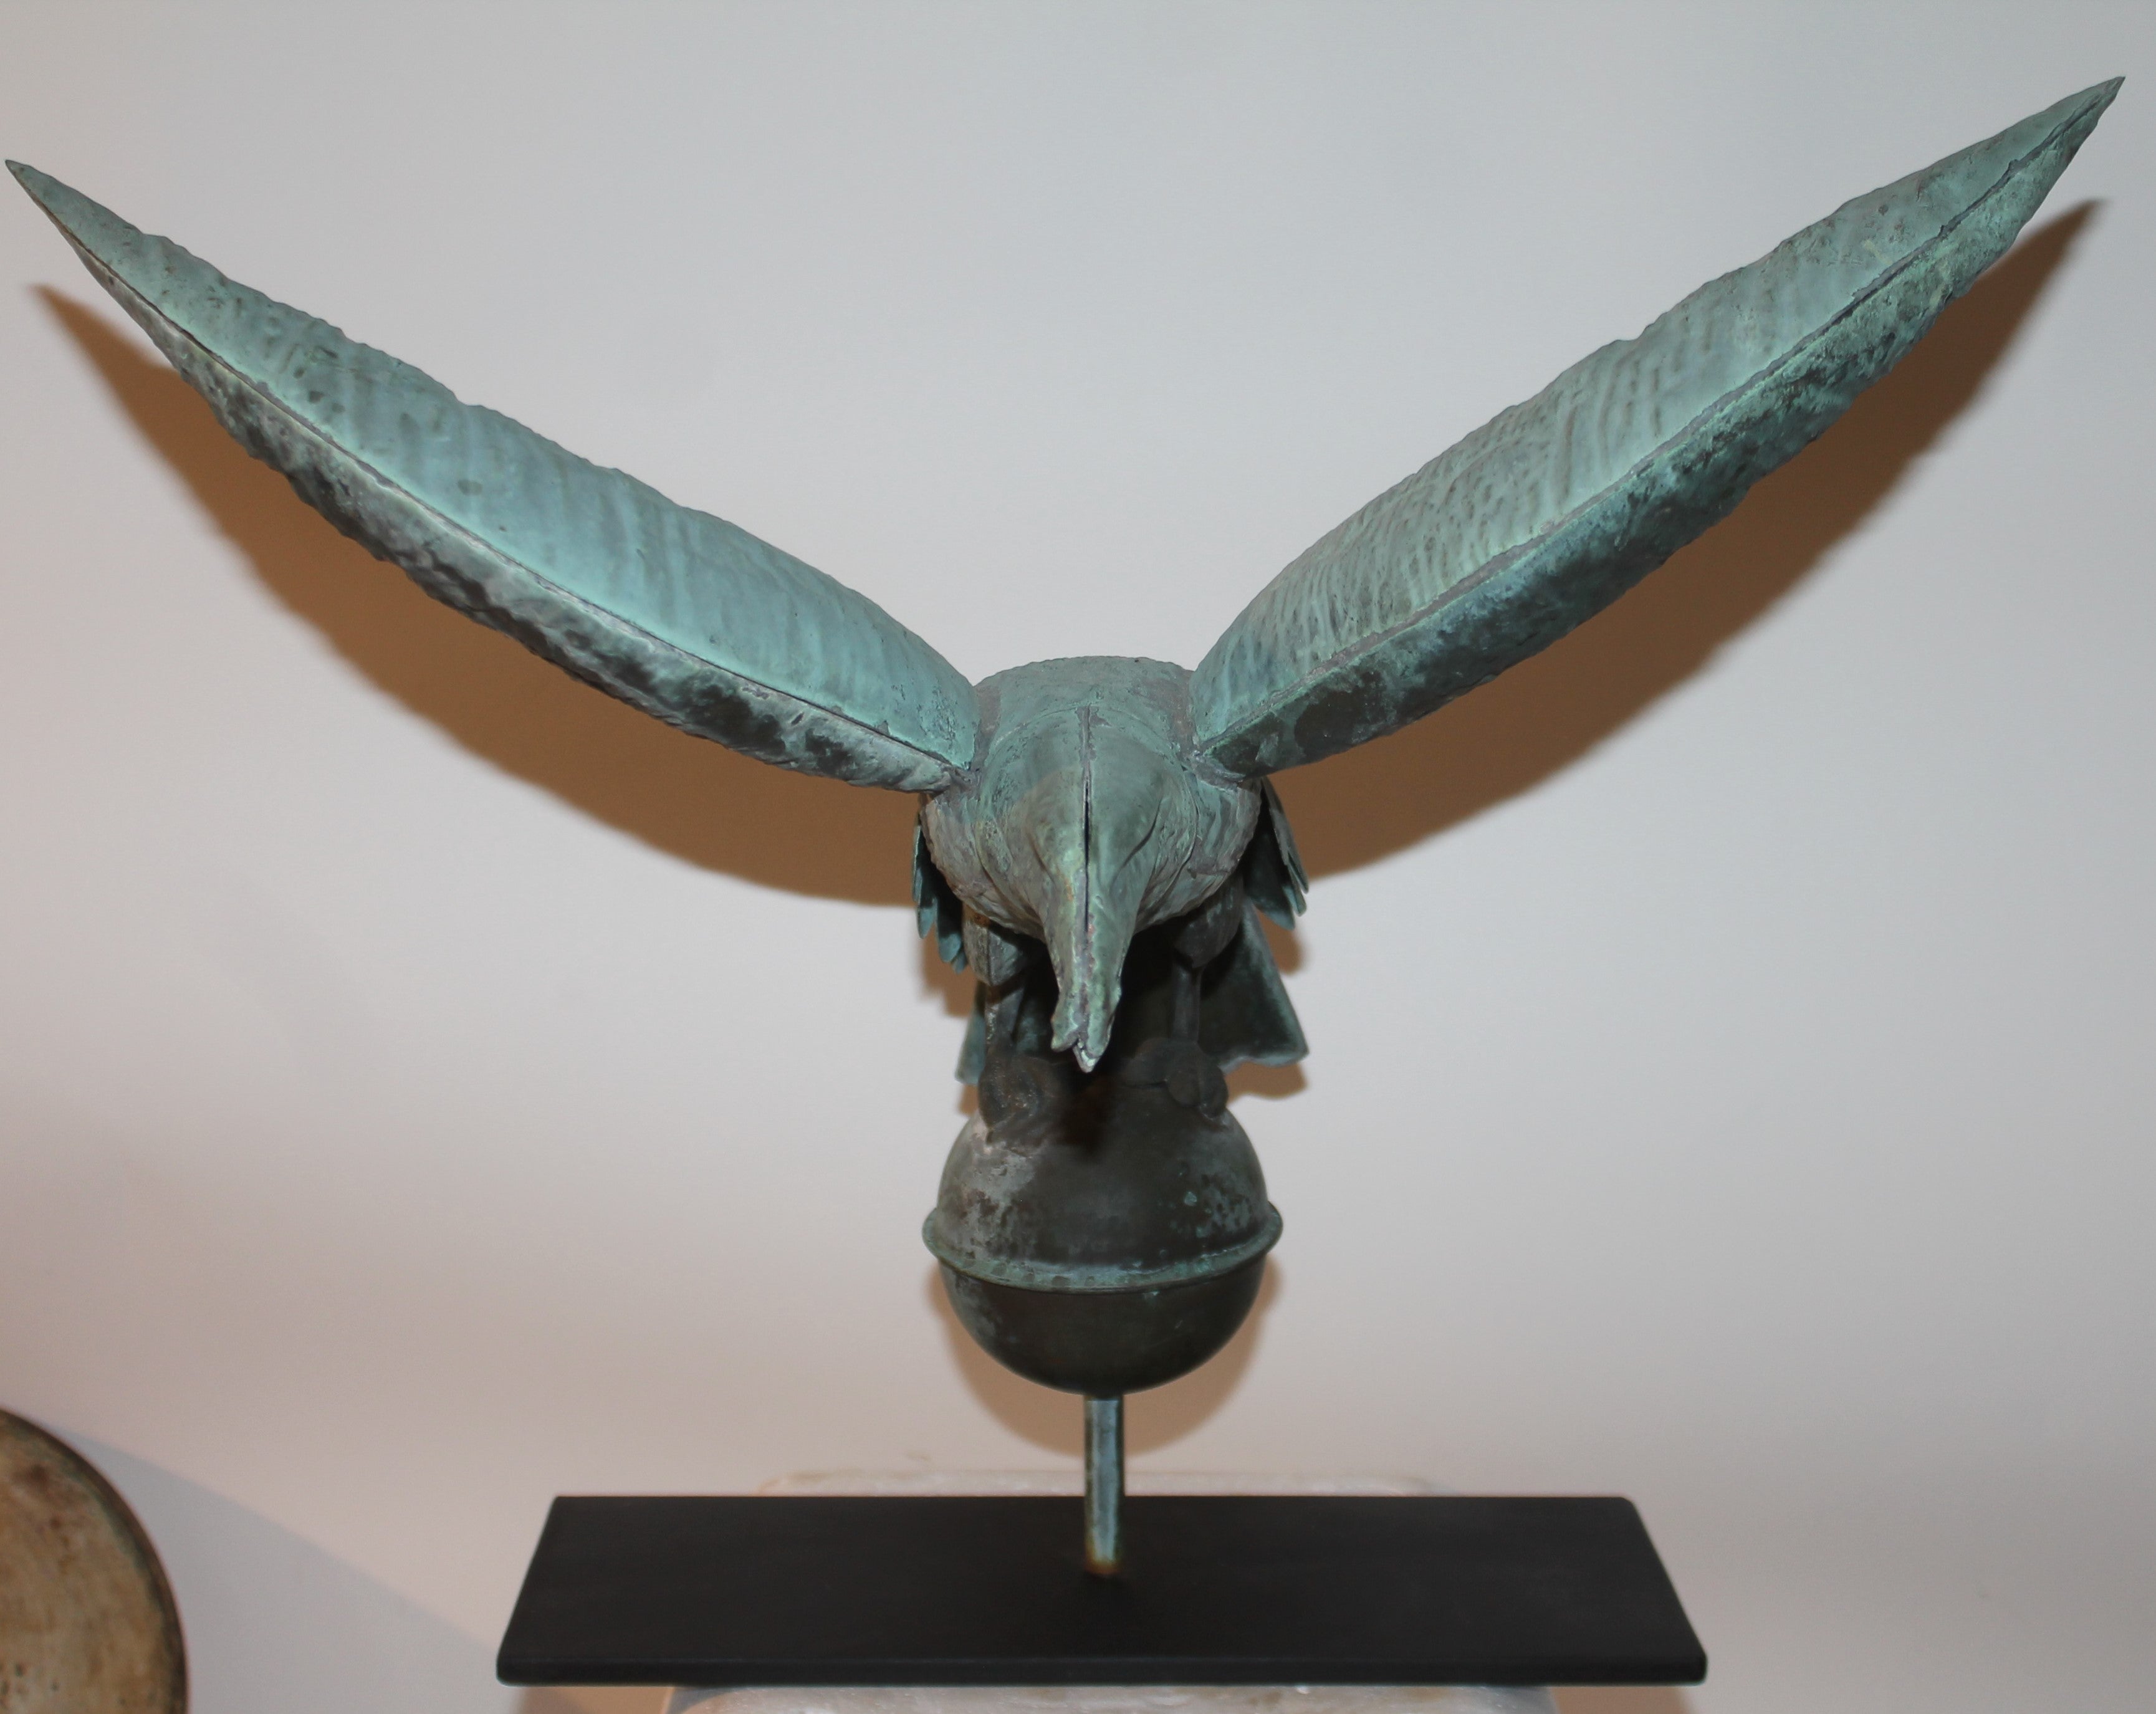 This fine 19th c patinaed eagle weather vane was found in New England. The iron base is a custom made stand. The condition is very good on this early fine with no dents or holes. Wonderful undisturbed surface.